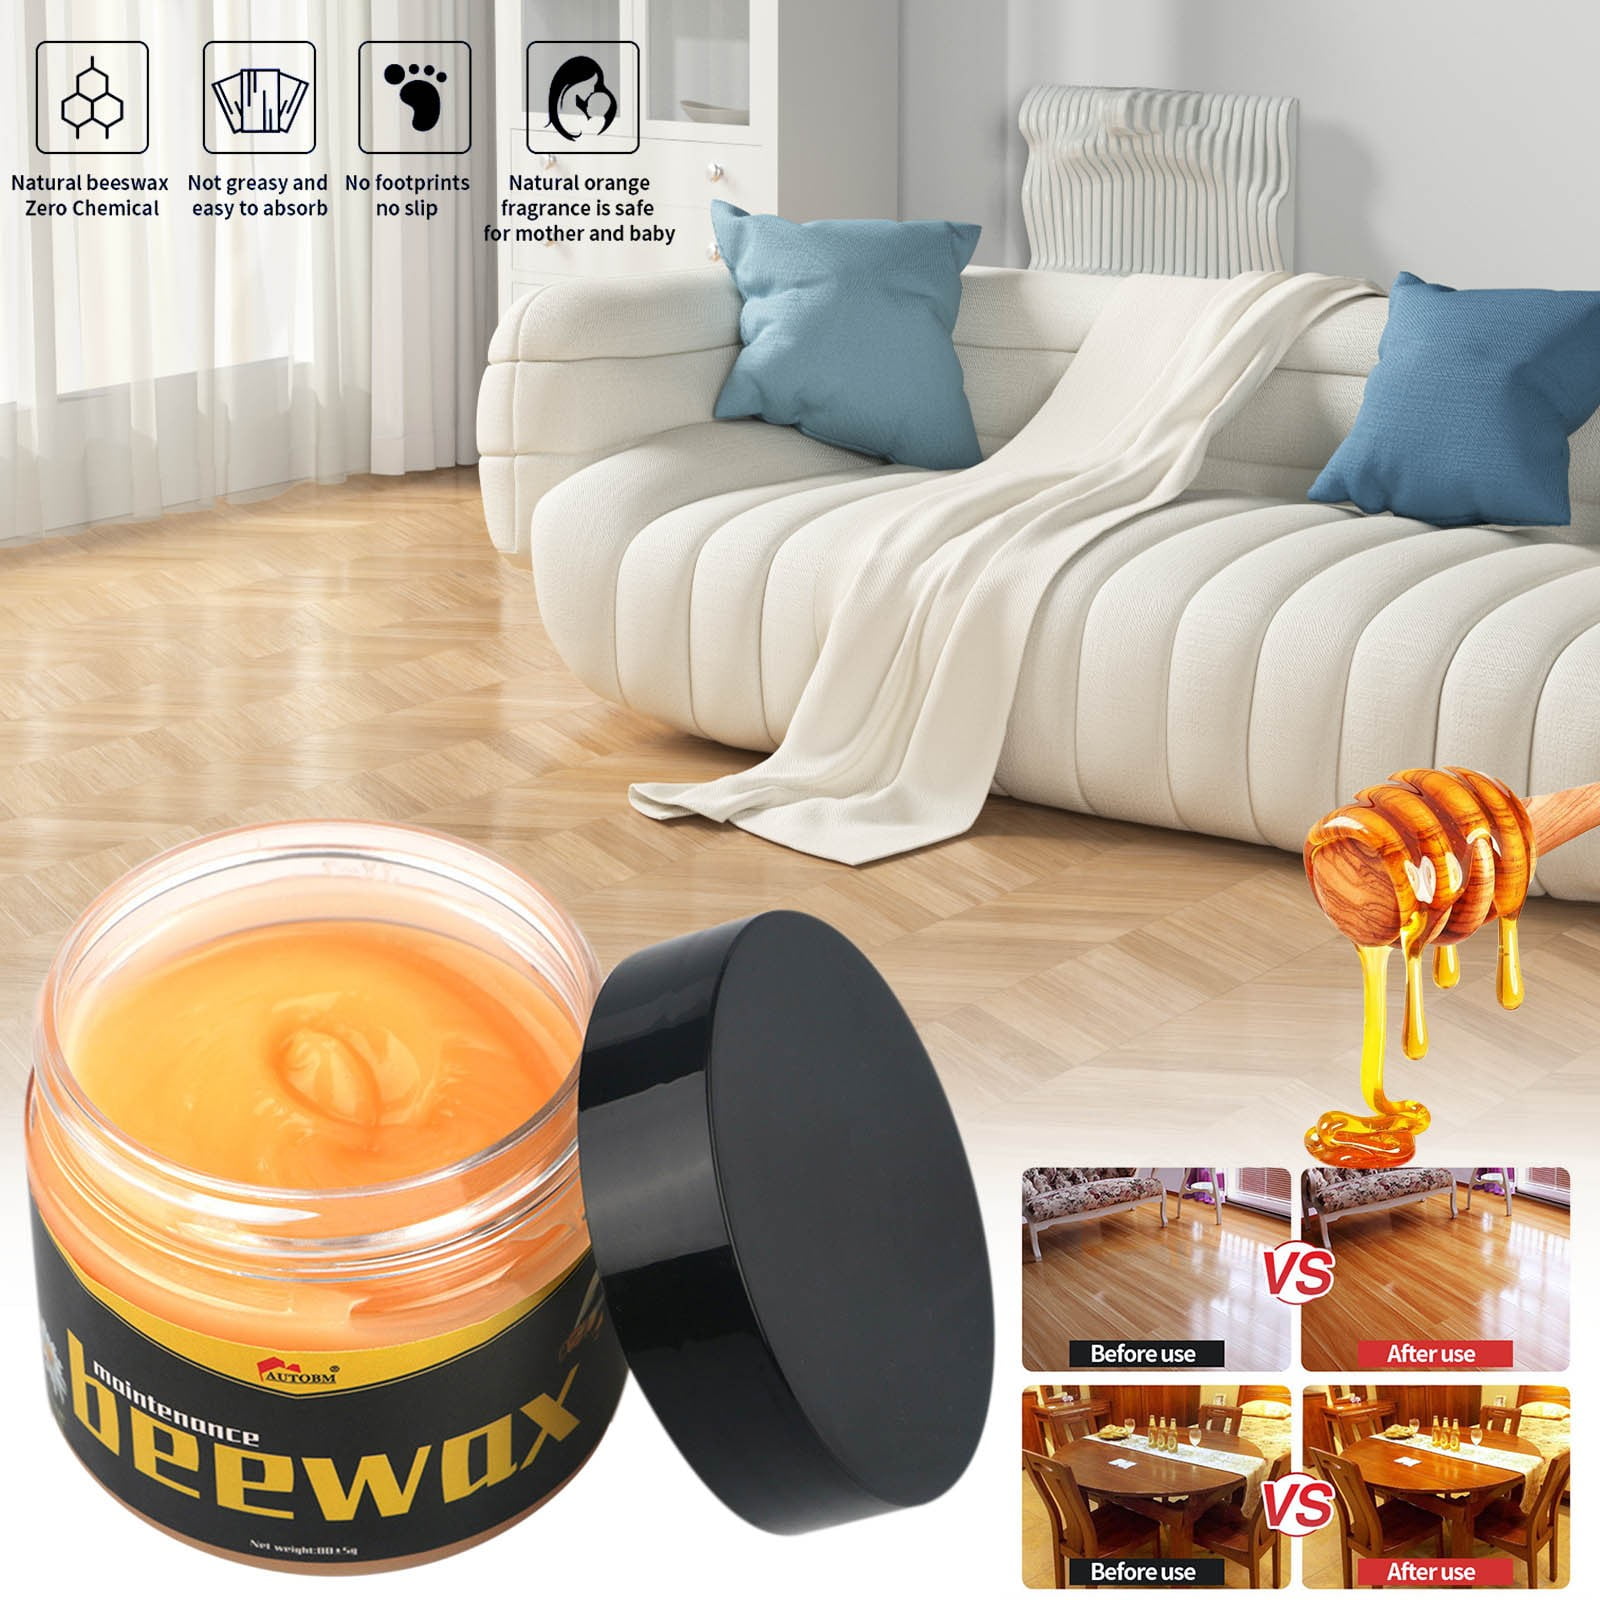 Natural Micro-Molecularized Beeswax Spray, Beeswax Spray Furniture Polish,  Furniture Care, Used for Floor Table Chair Cabinet Home Furniture to Shine